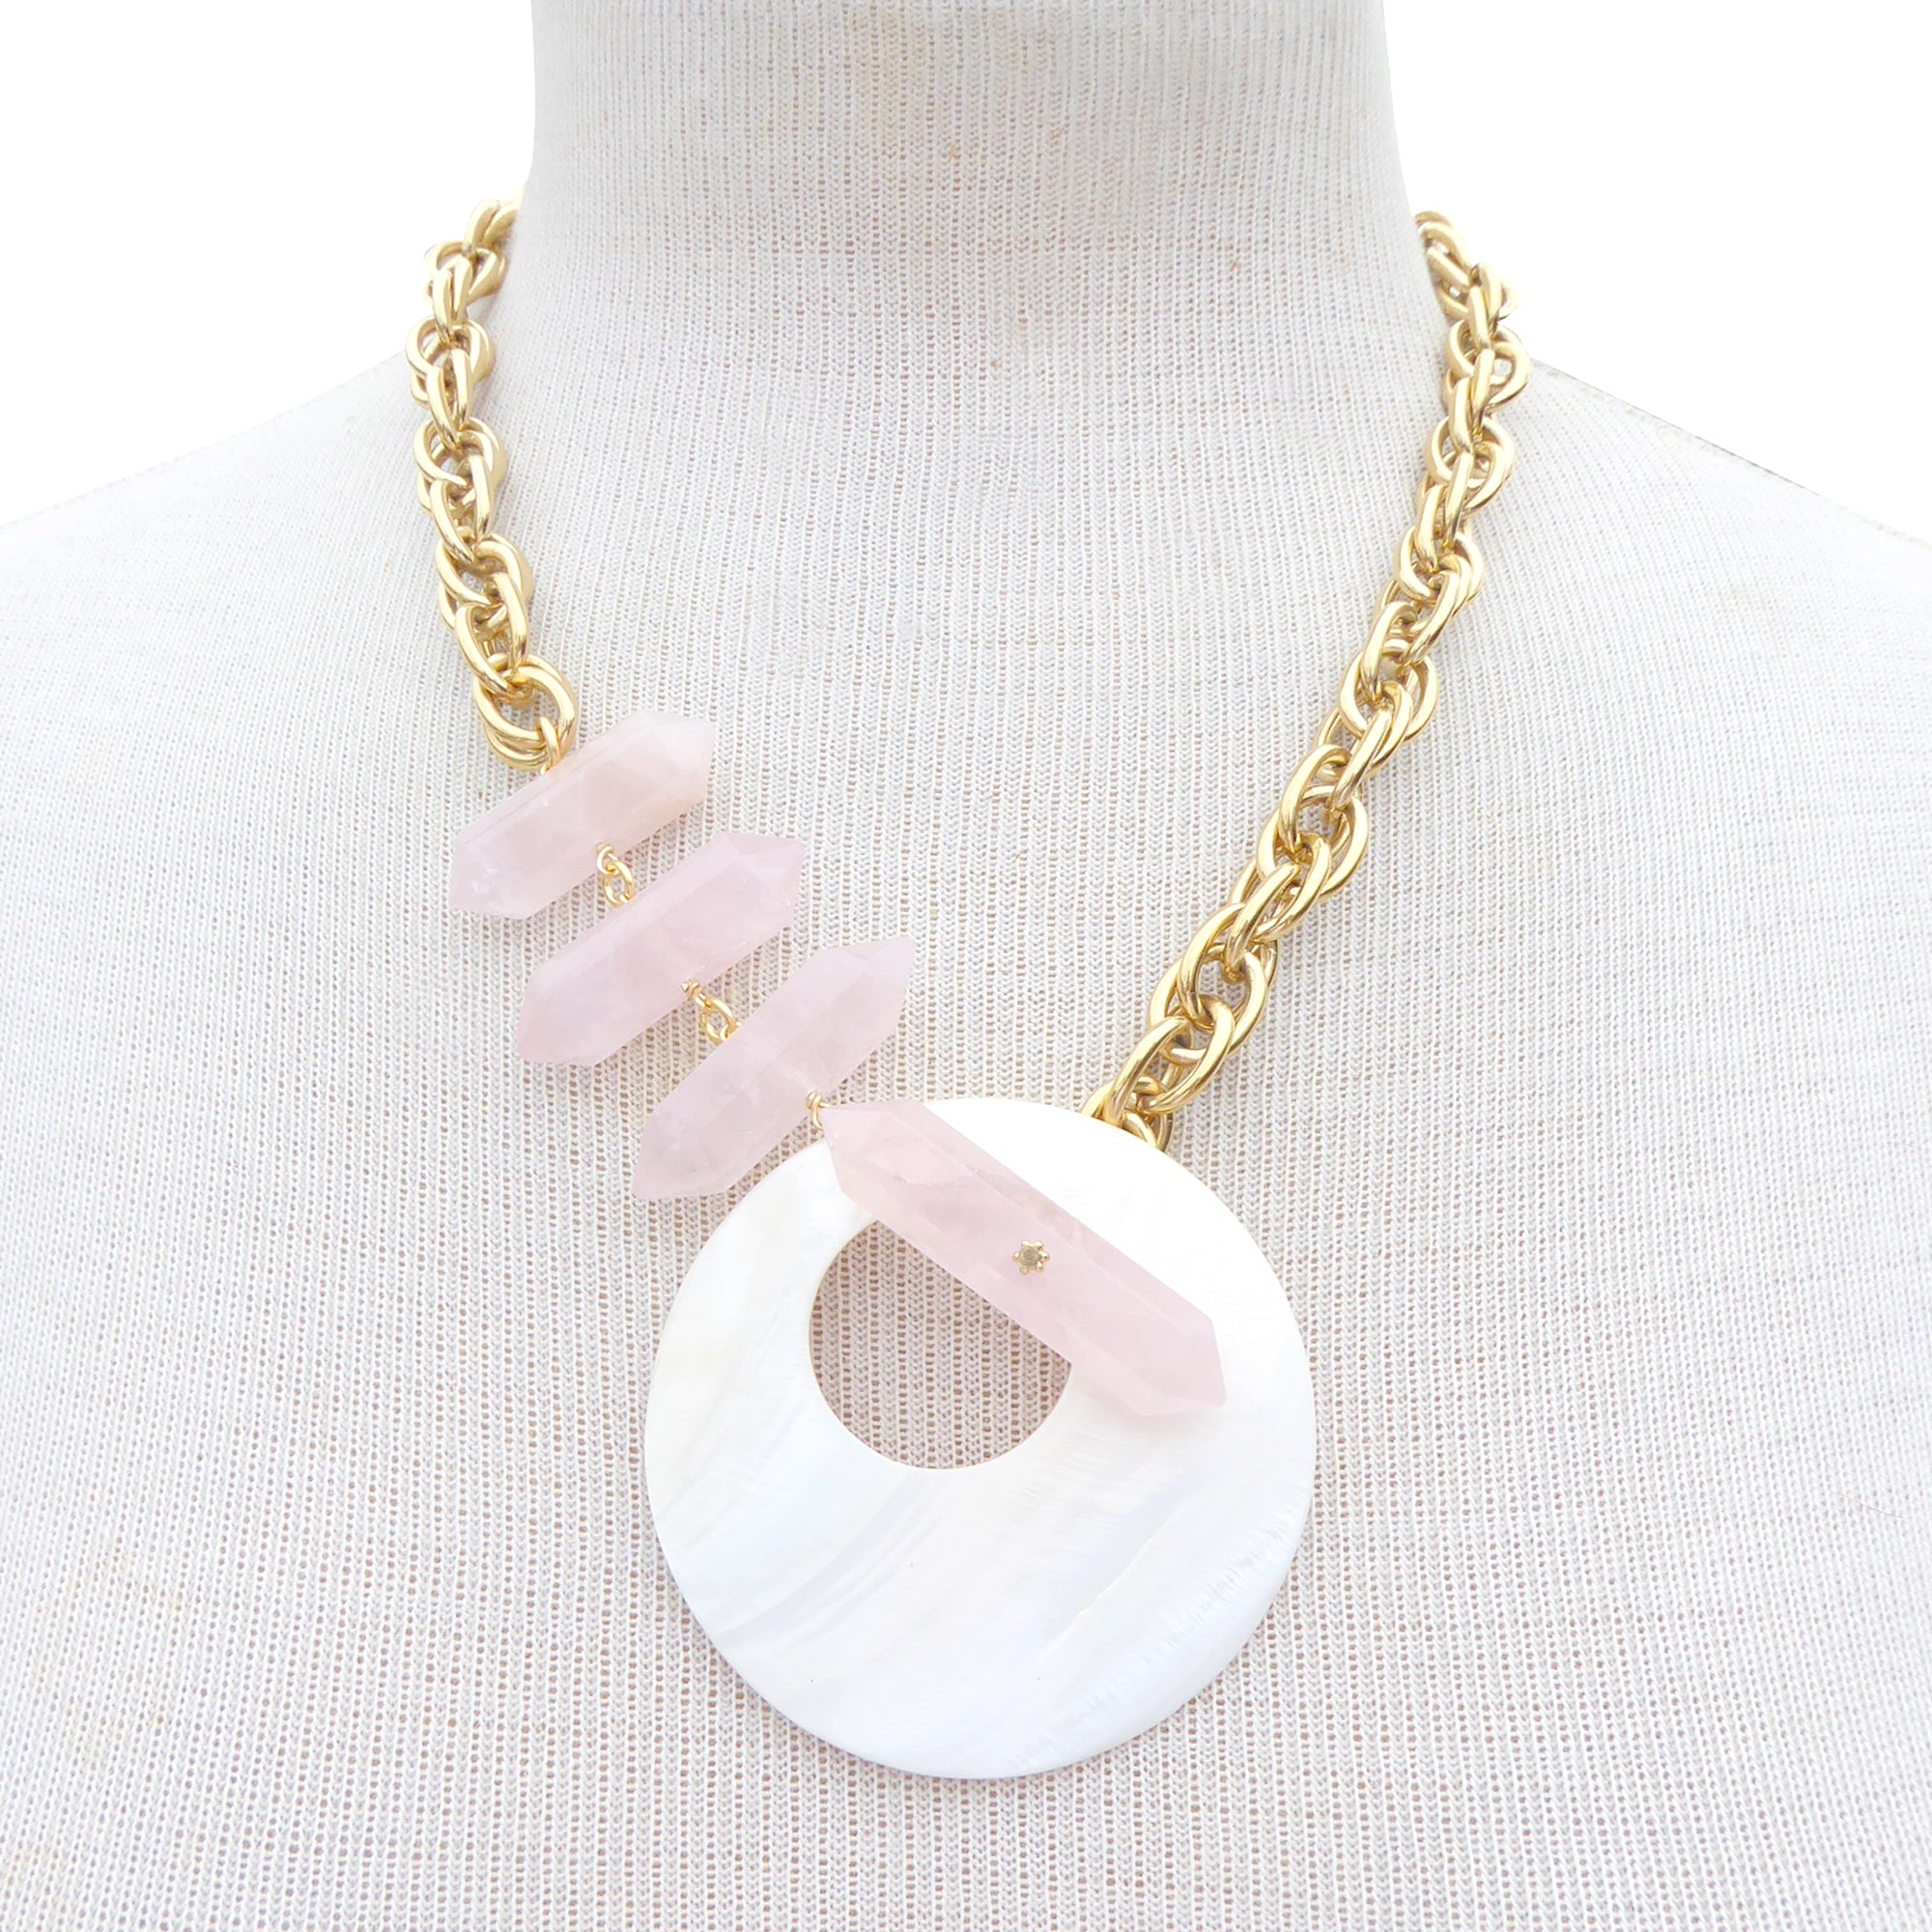 Marna rose quartz and shell necklace by Jenny Dayco 8